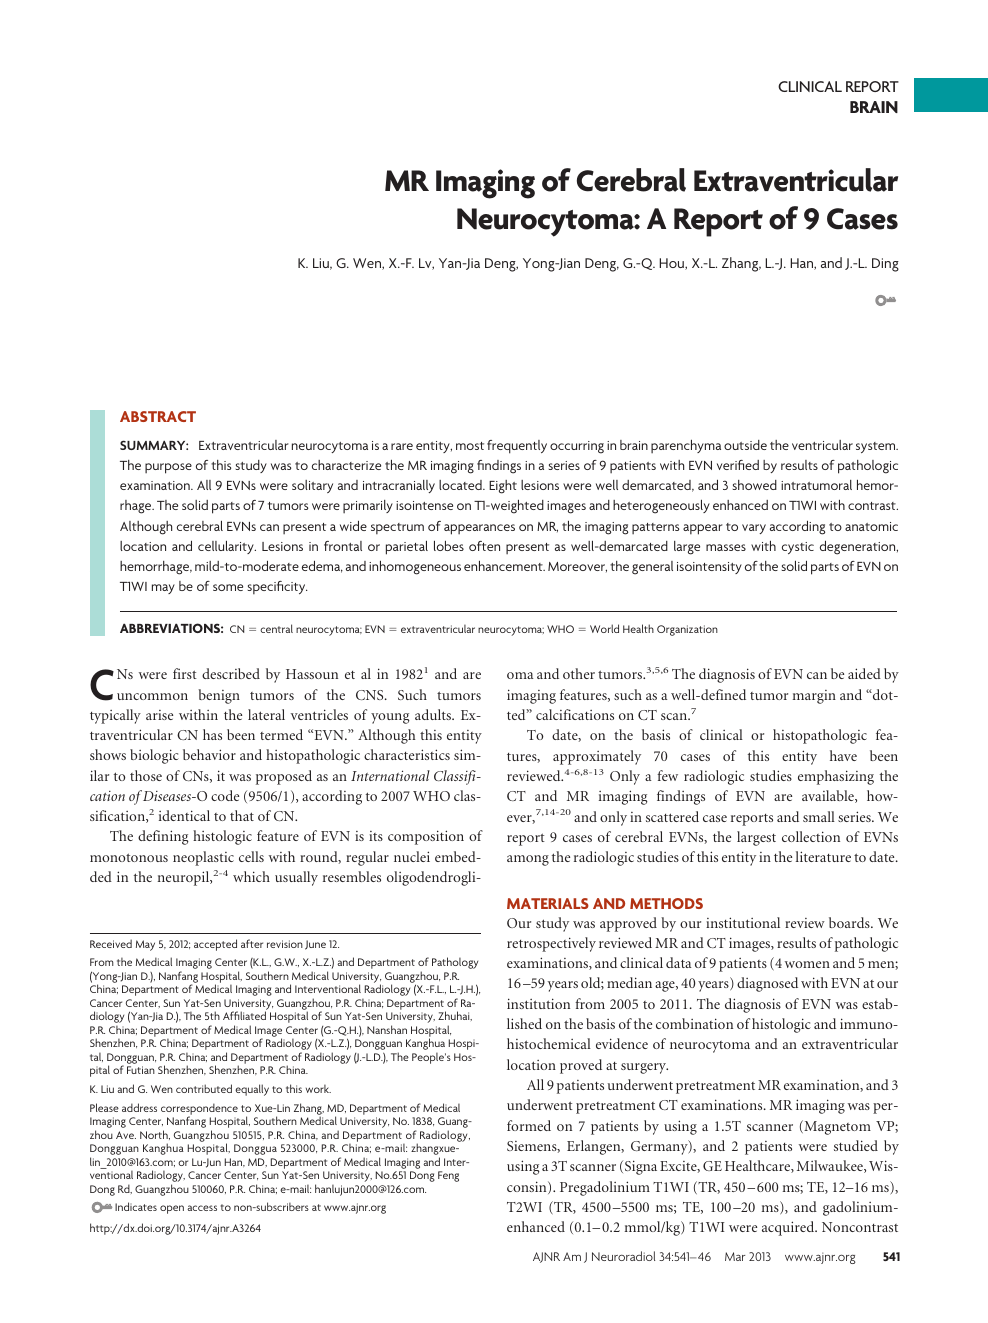 Mr Imaging Of Cerebral Extraventricular Neurocytoma A Report Of 9 Cases Topic Of Research Paper In Clinical Medicine Download Scholarly Article Pdf And Read For Free On Cyberleninka Open Science Hub